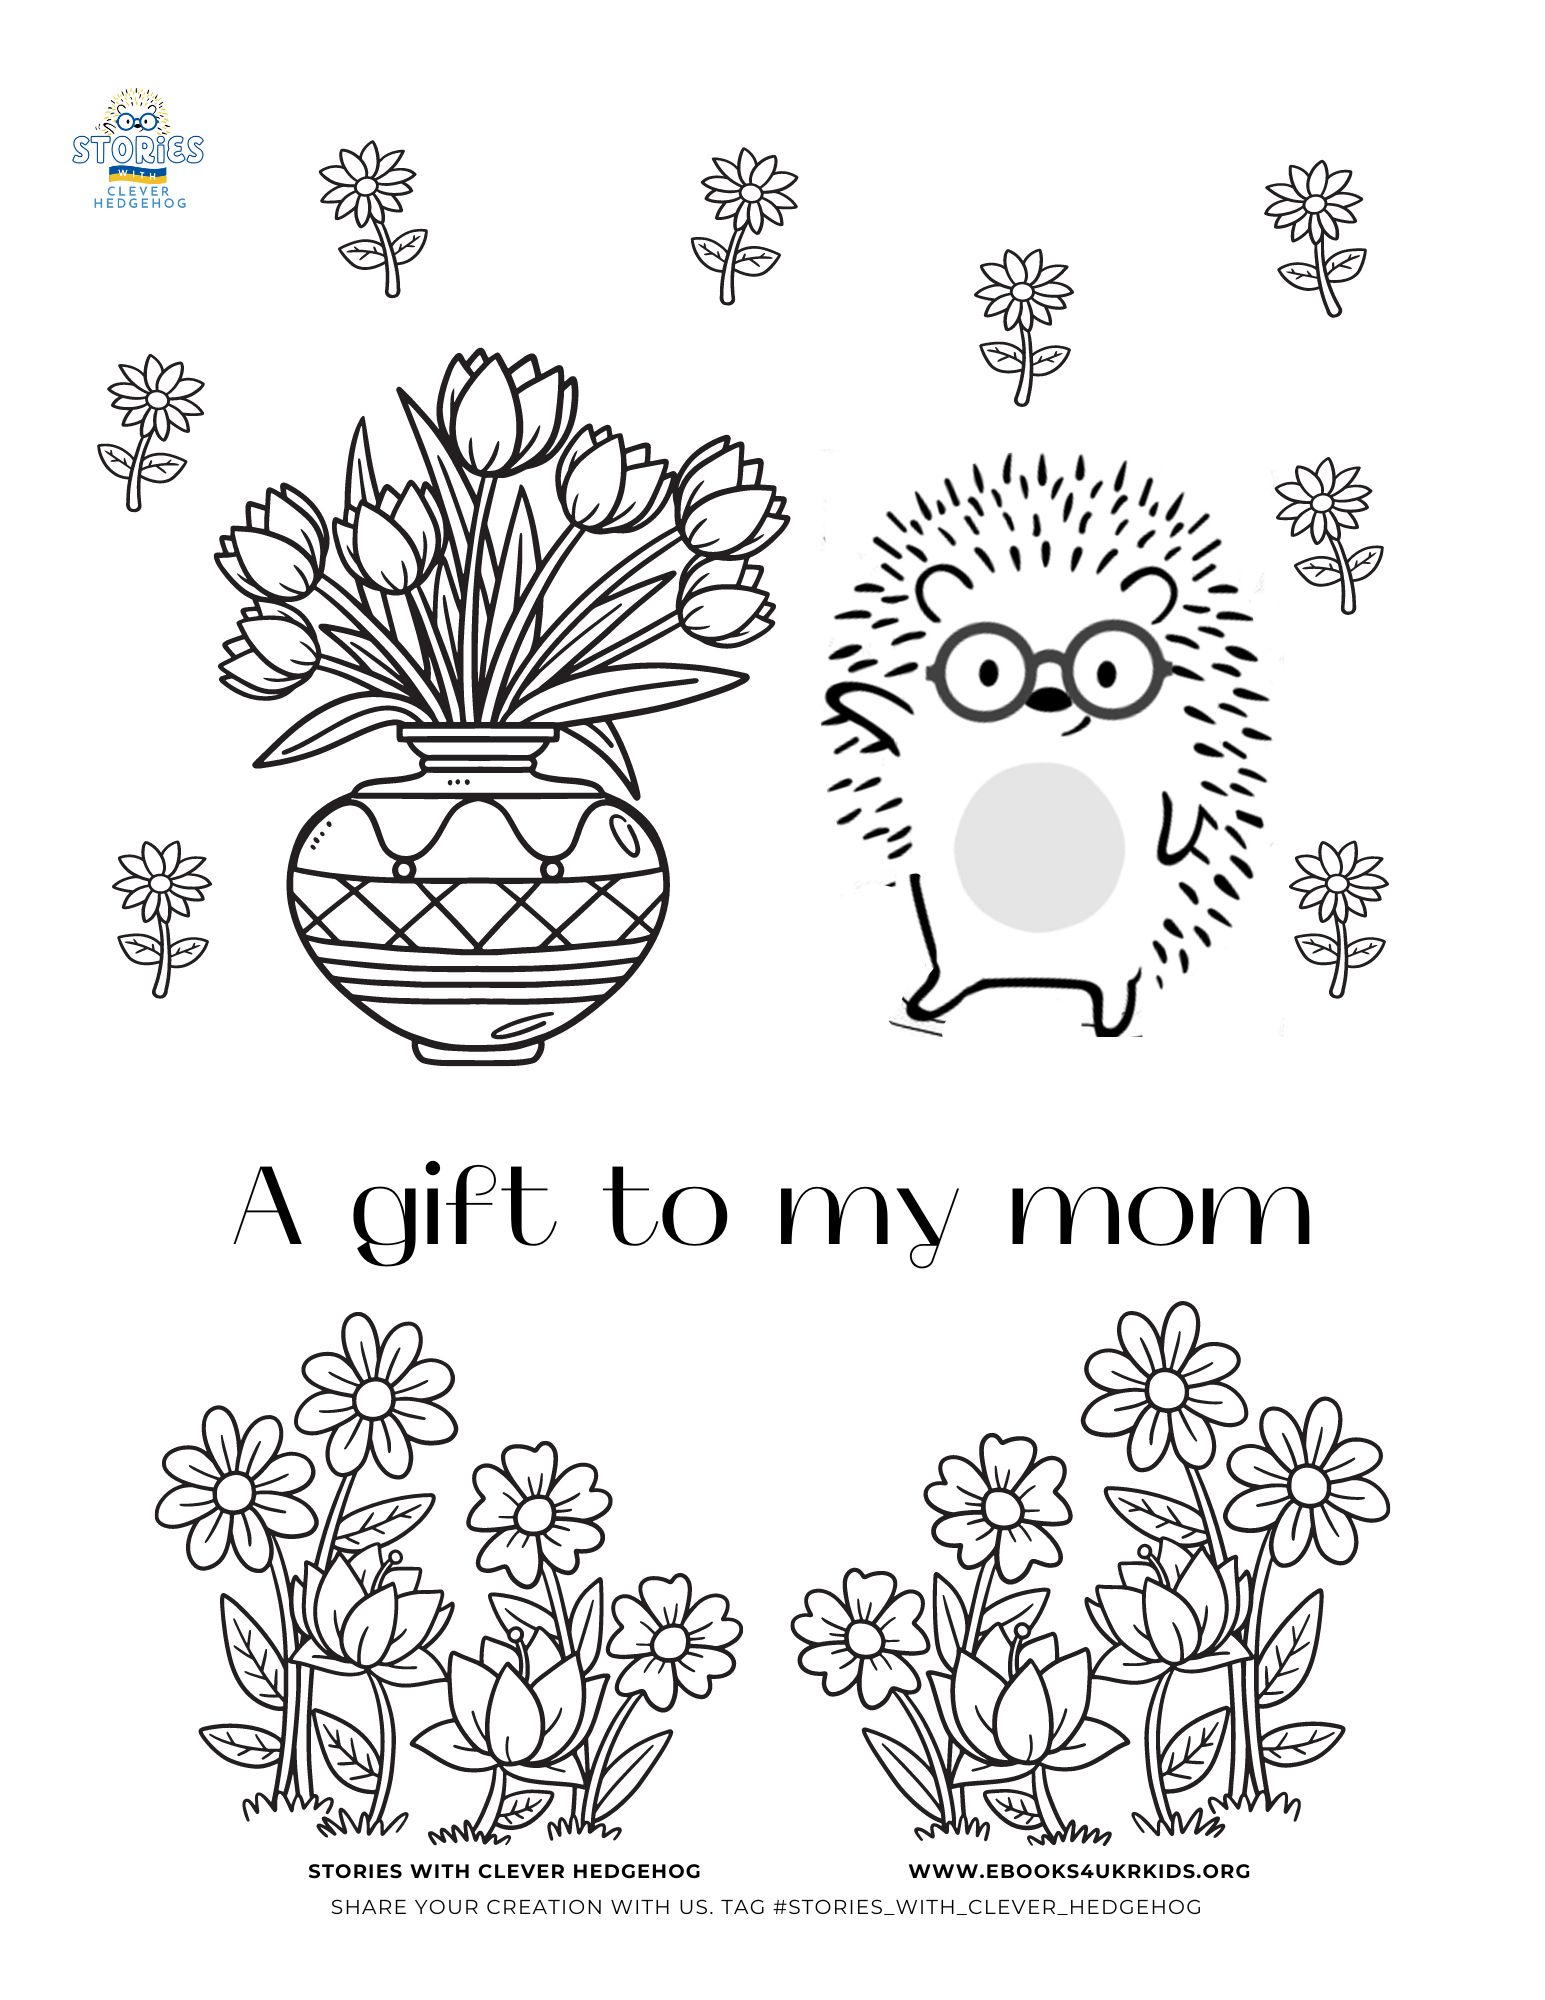 Coloring page for kids, Stories with Clever Hedgehog, Happy spring coloring page, a gift to my mom